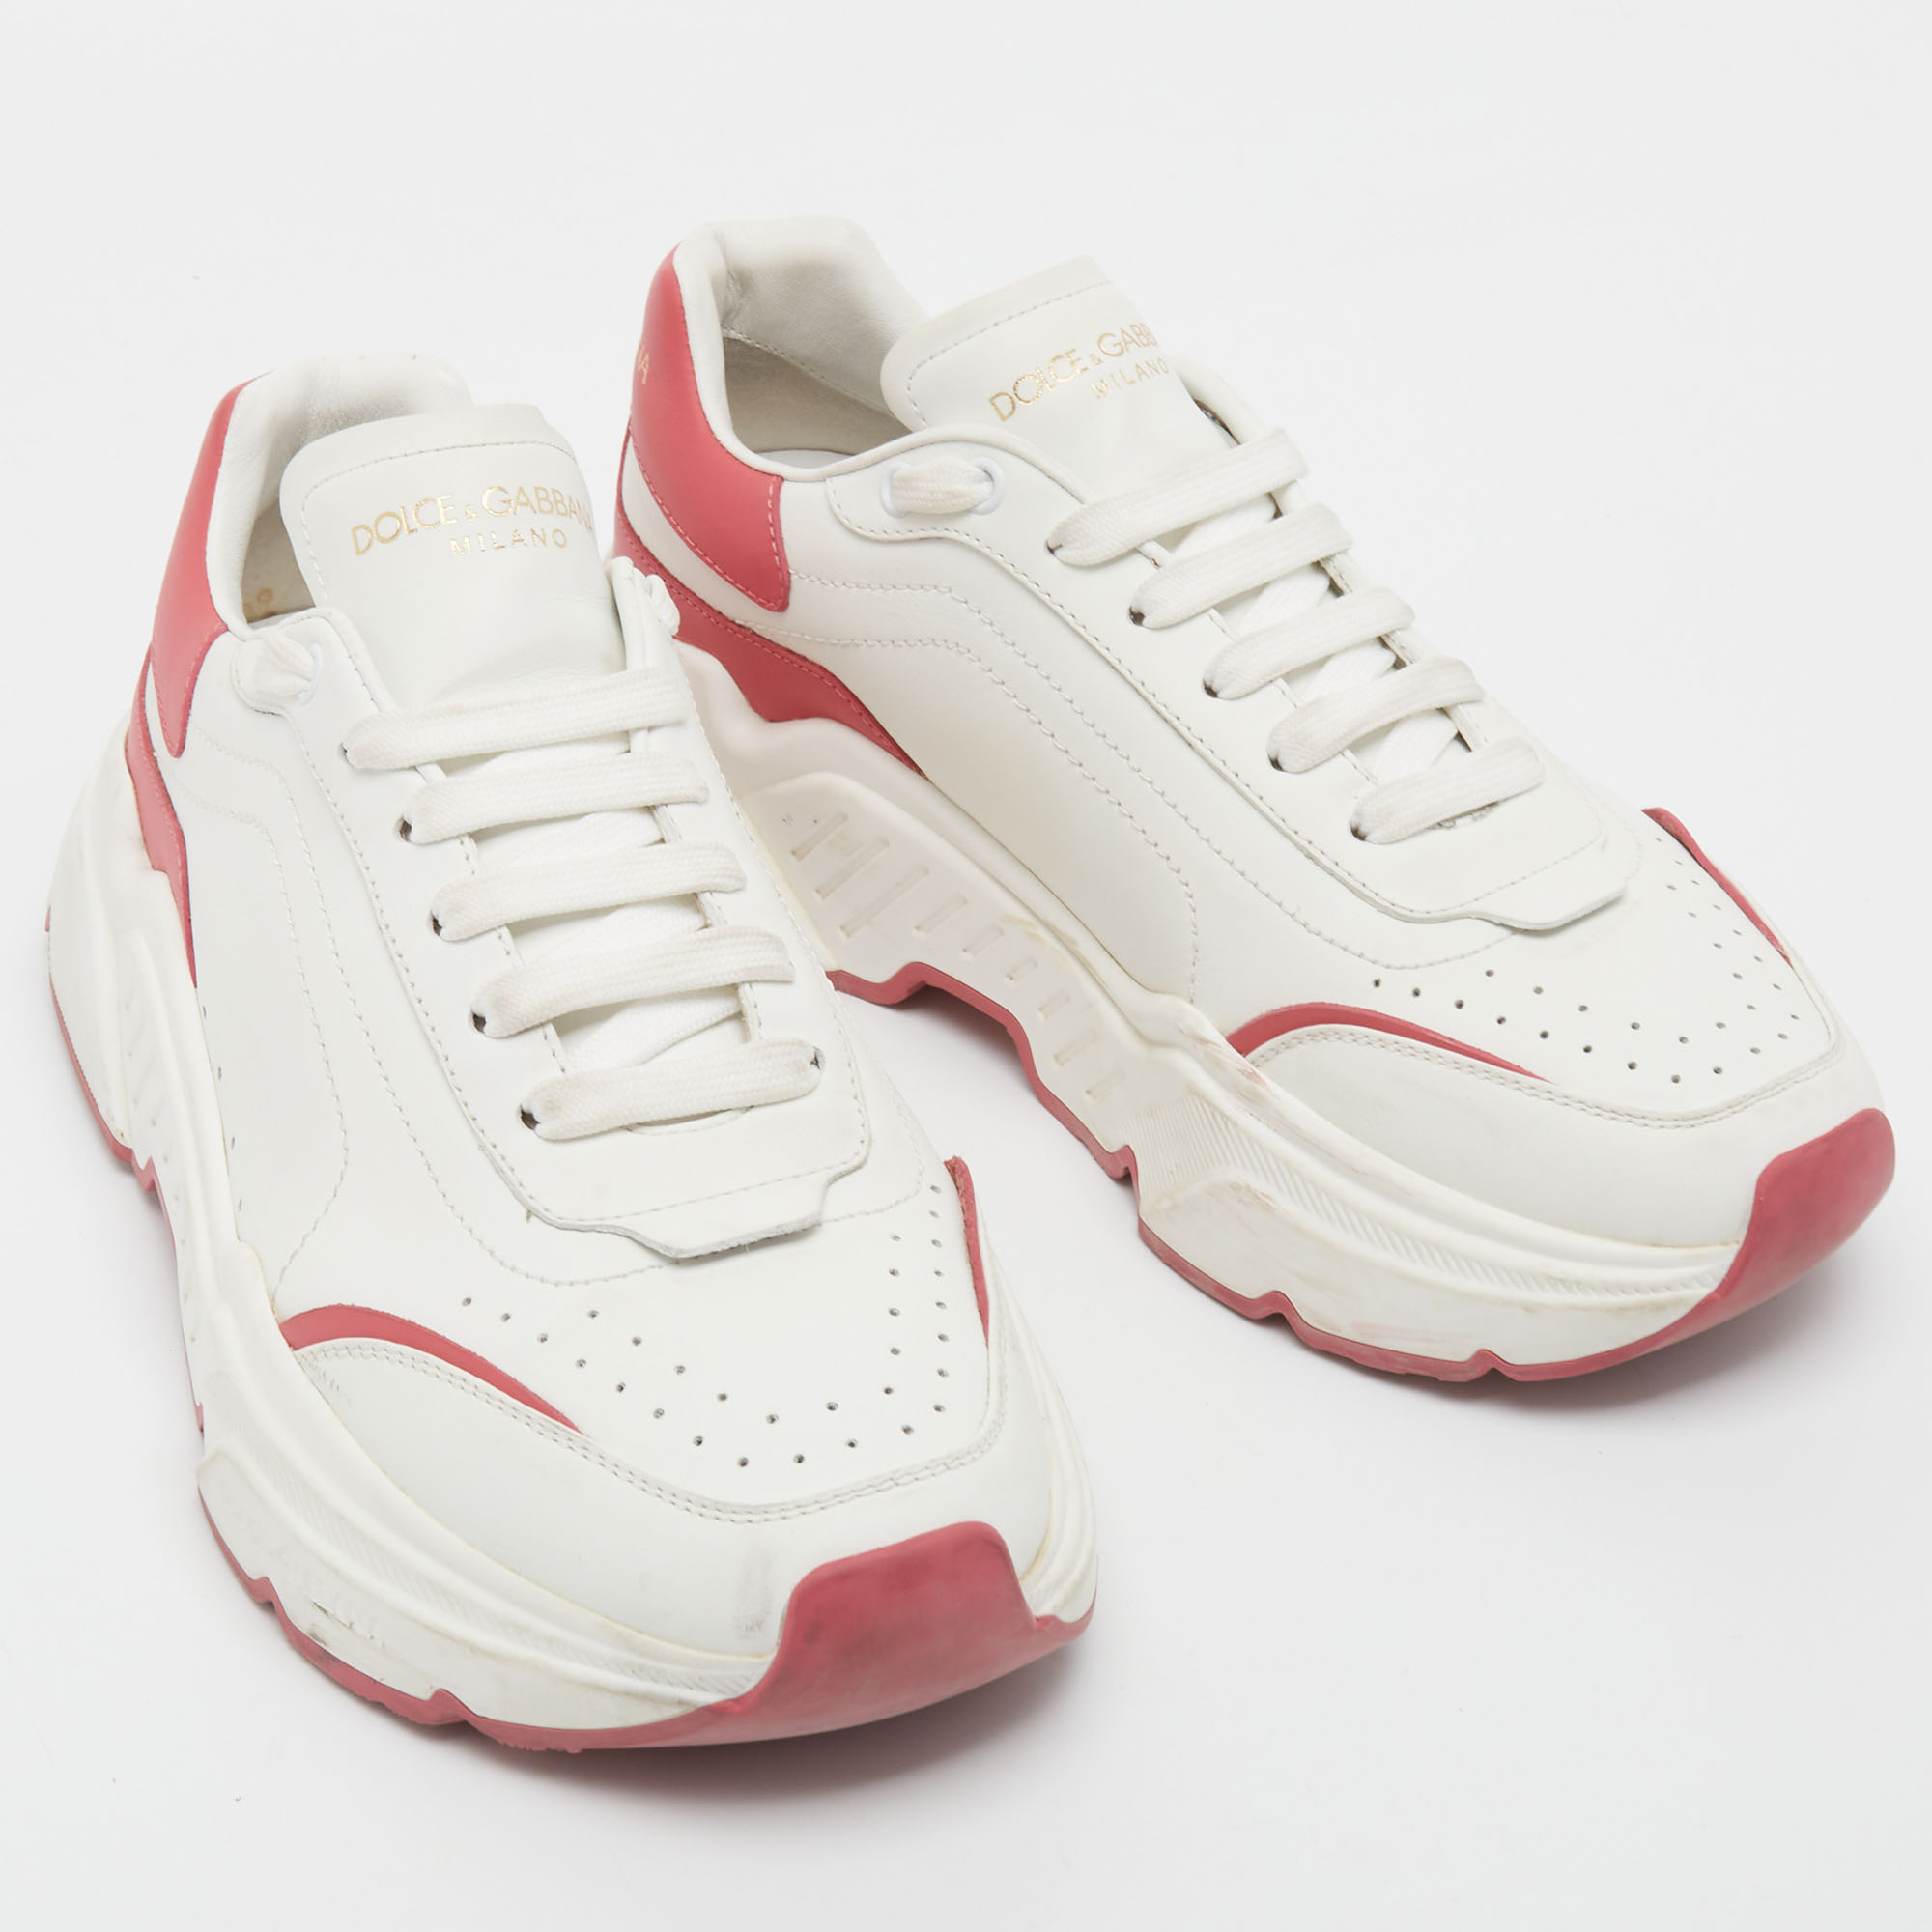 Dolce & Gabbana White/Pink Leather Daymaster Sneakers Size 41